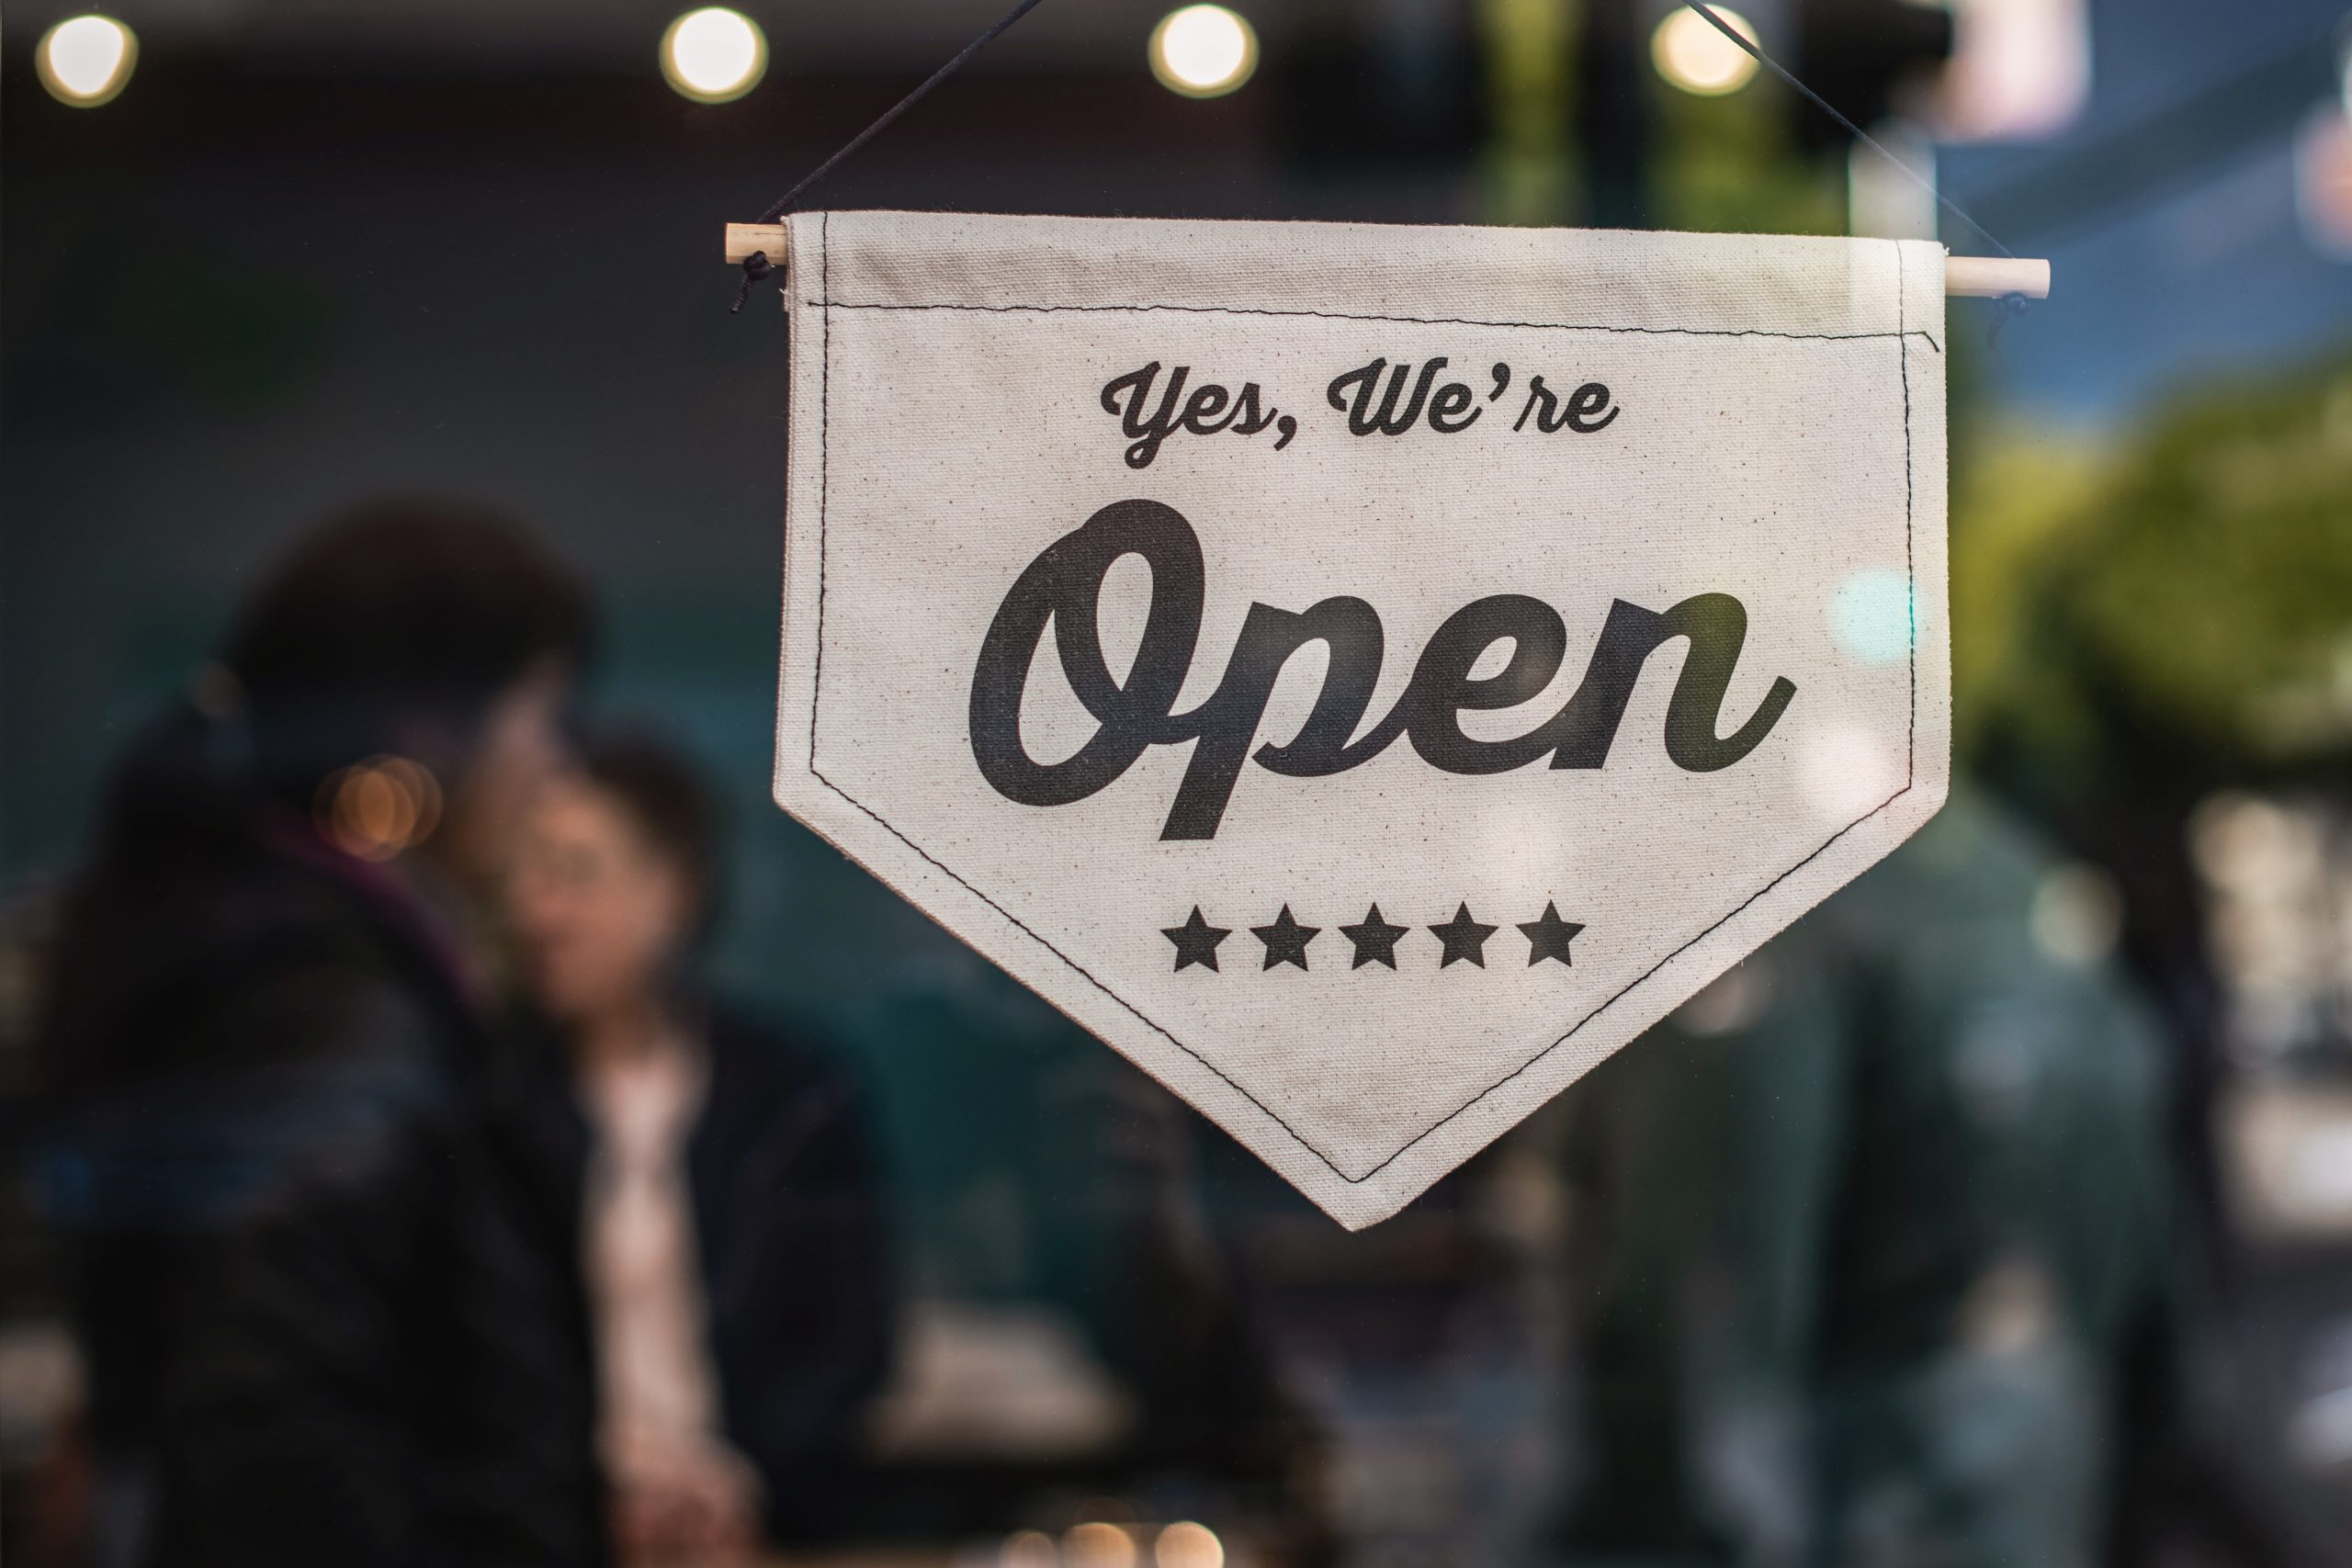 In an article about starting a small business, a cloth banner that reads "we're open."